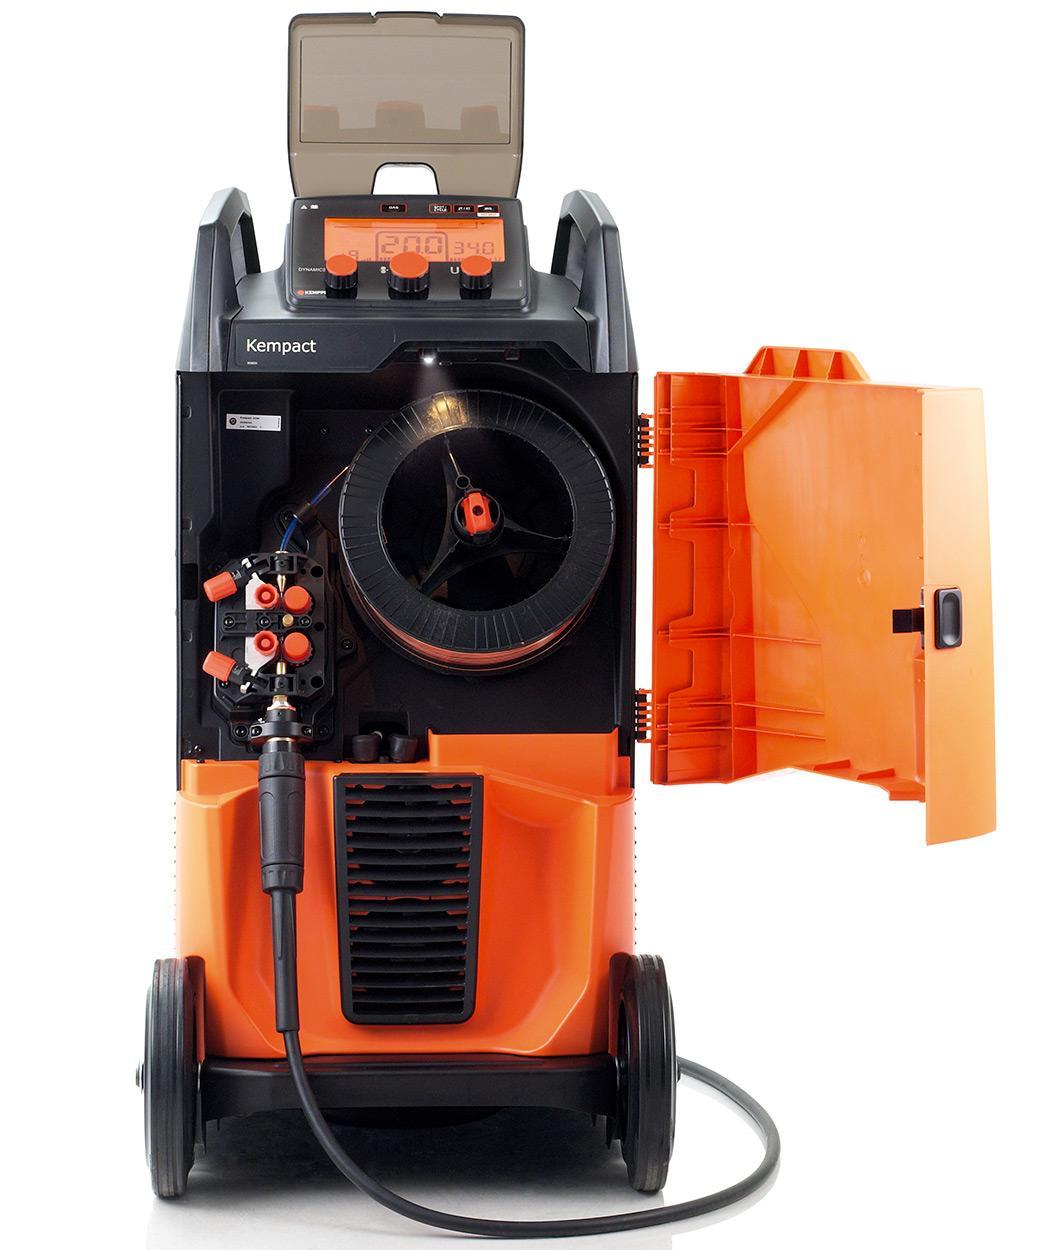 P2208GXE  Kemppi Kempact RA 253R, 250A 3 Phase 400v Mig Welder, with Flexlite GXe 305G 5m Torch